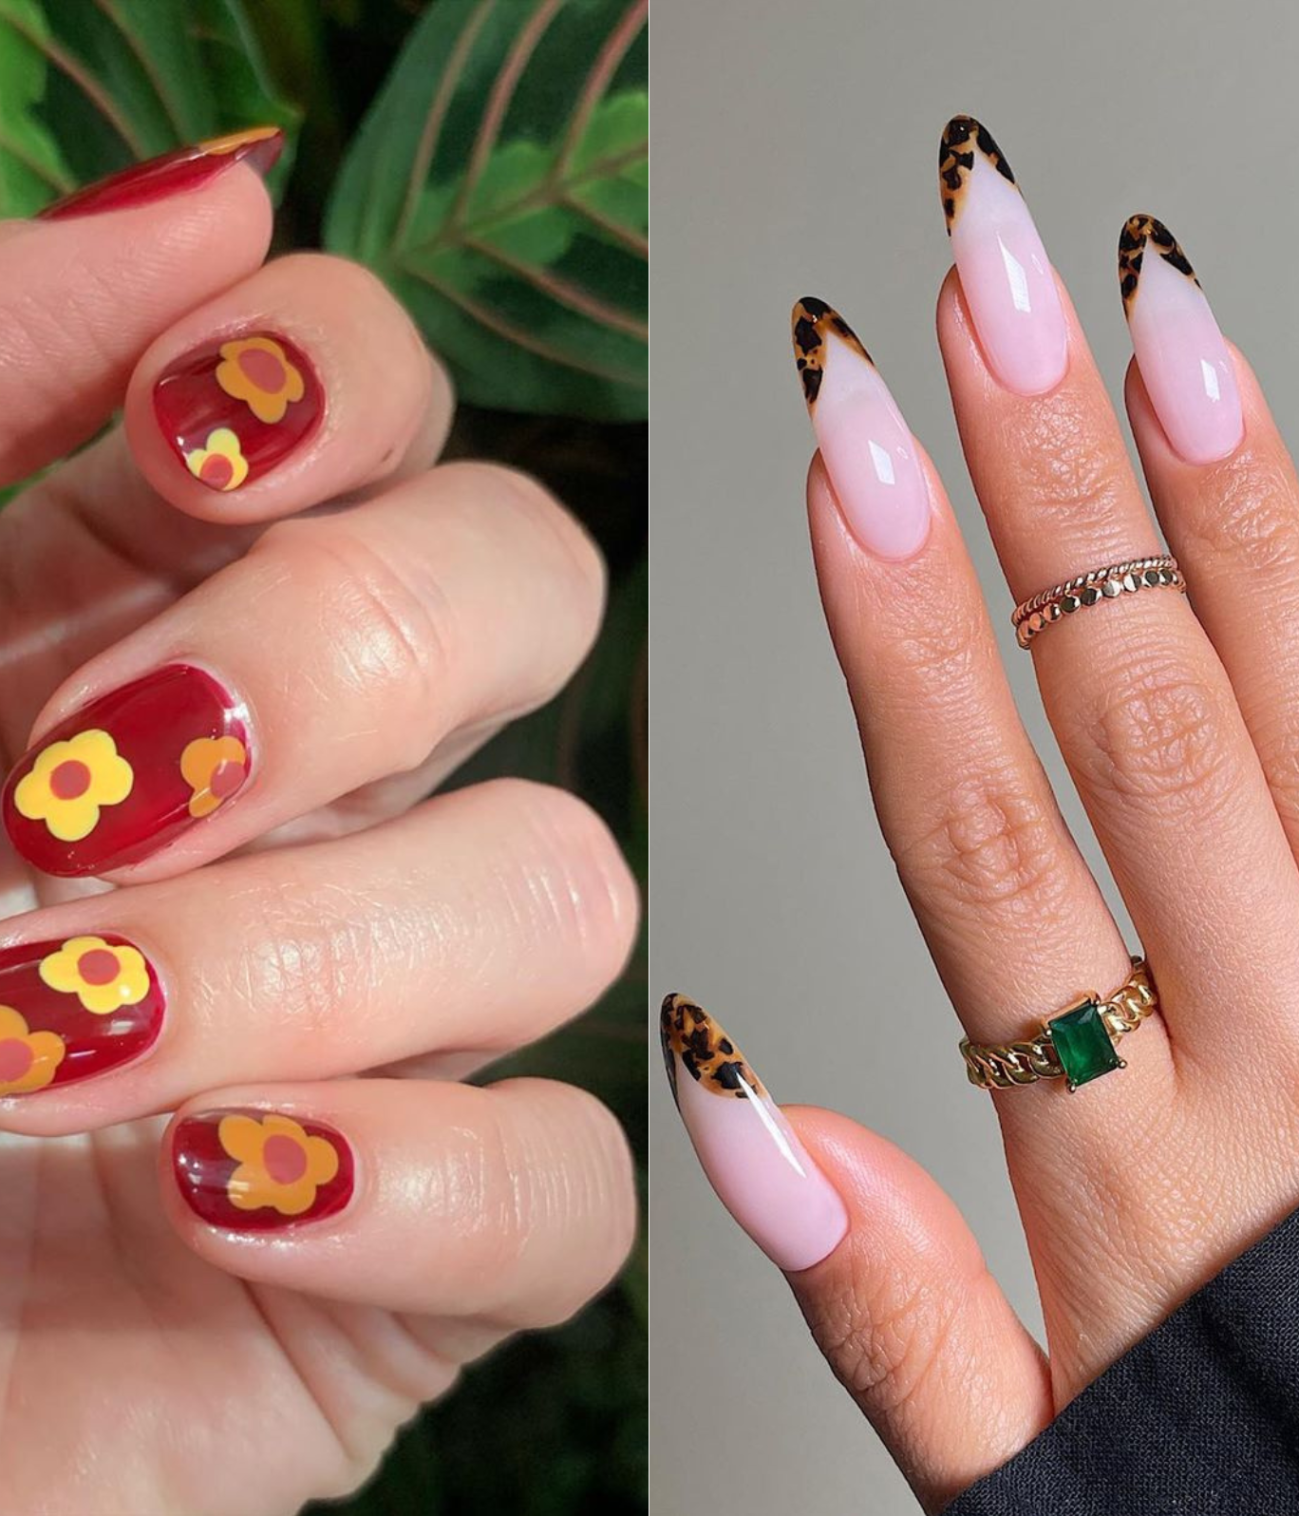 Get Your Nails Ready For Any Occasion With These Trendy Nail Polish Designs